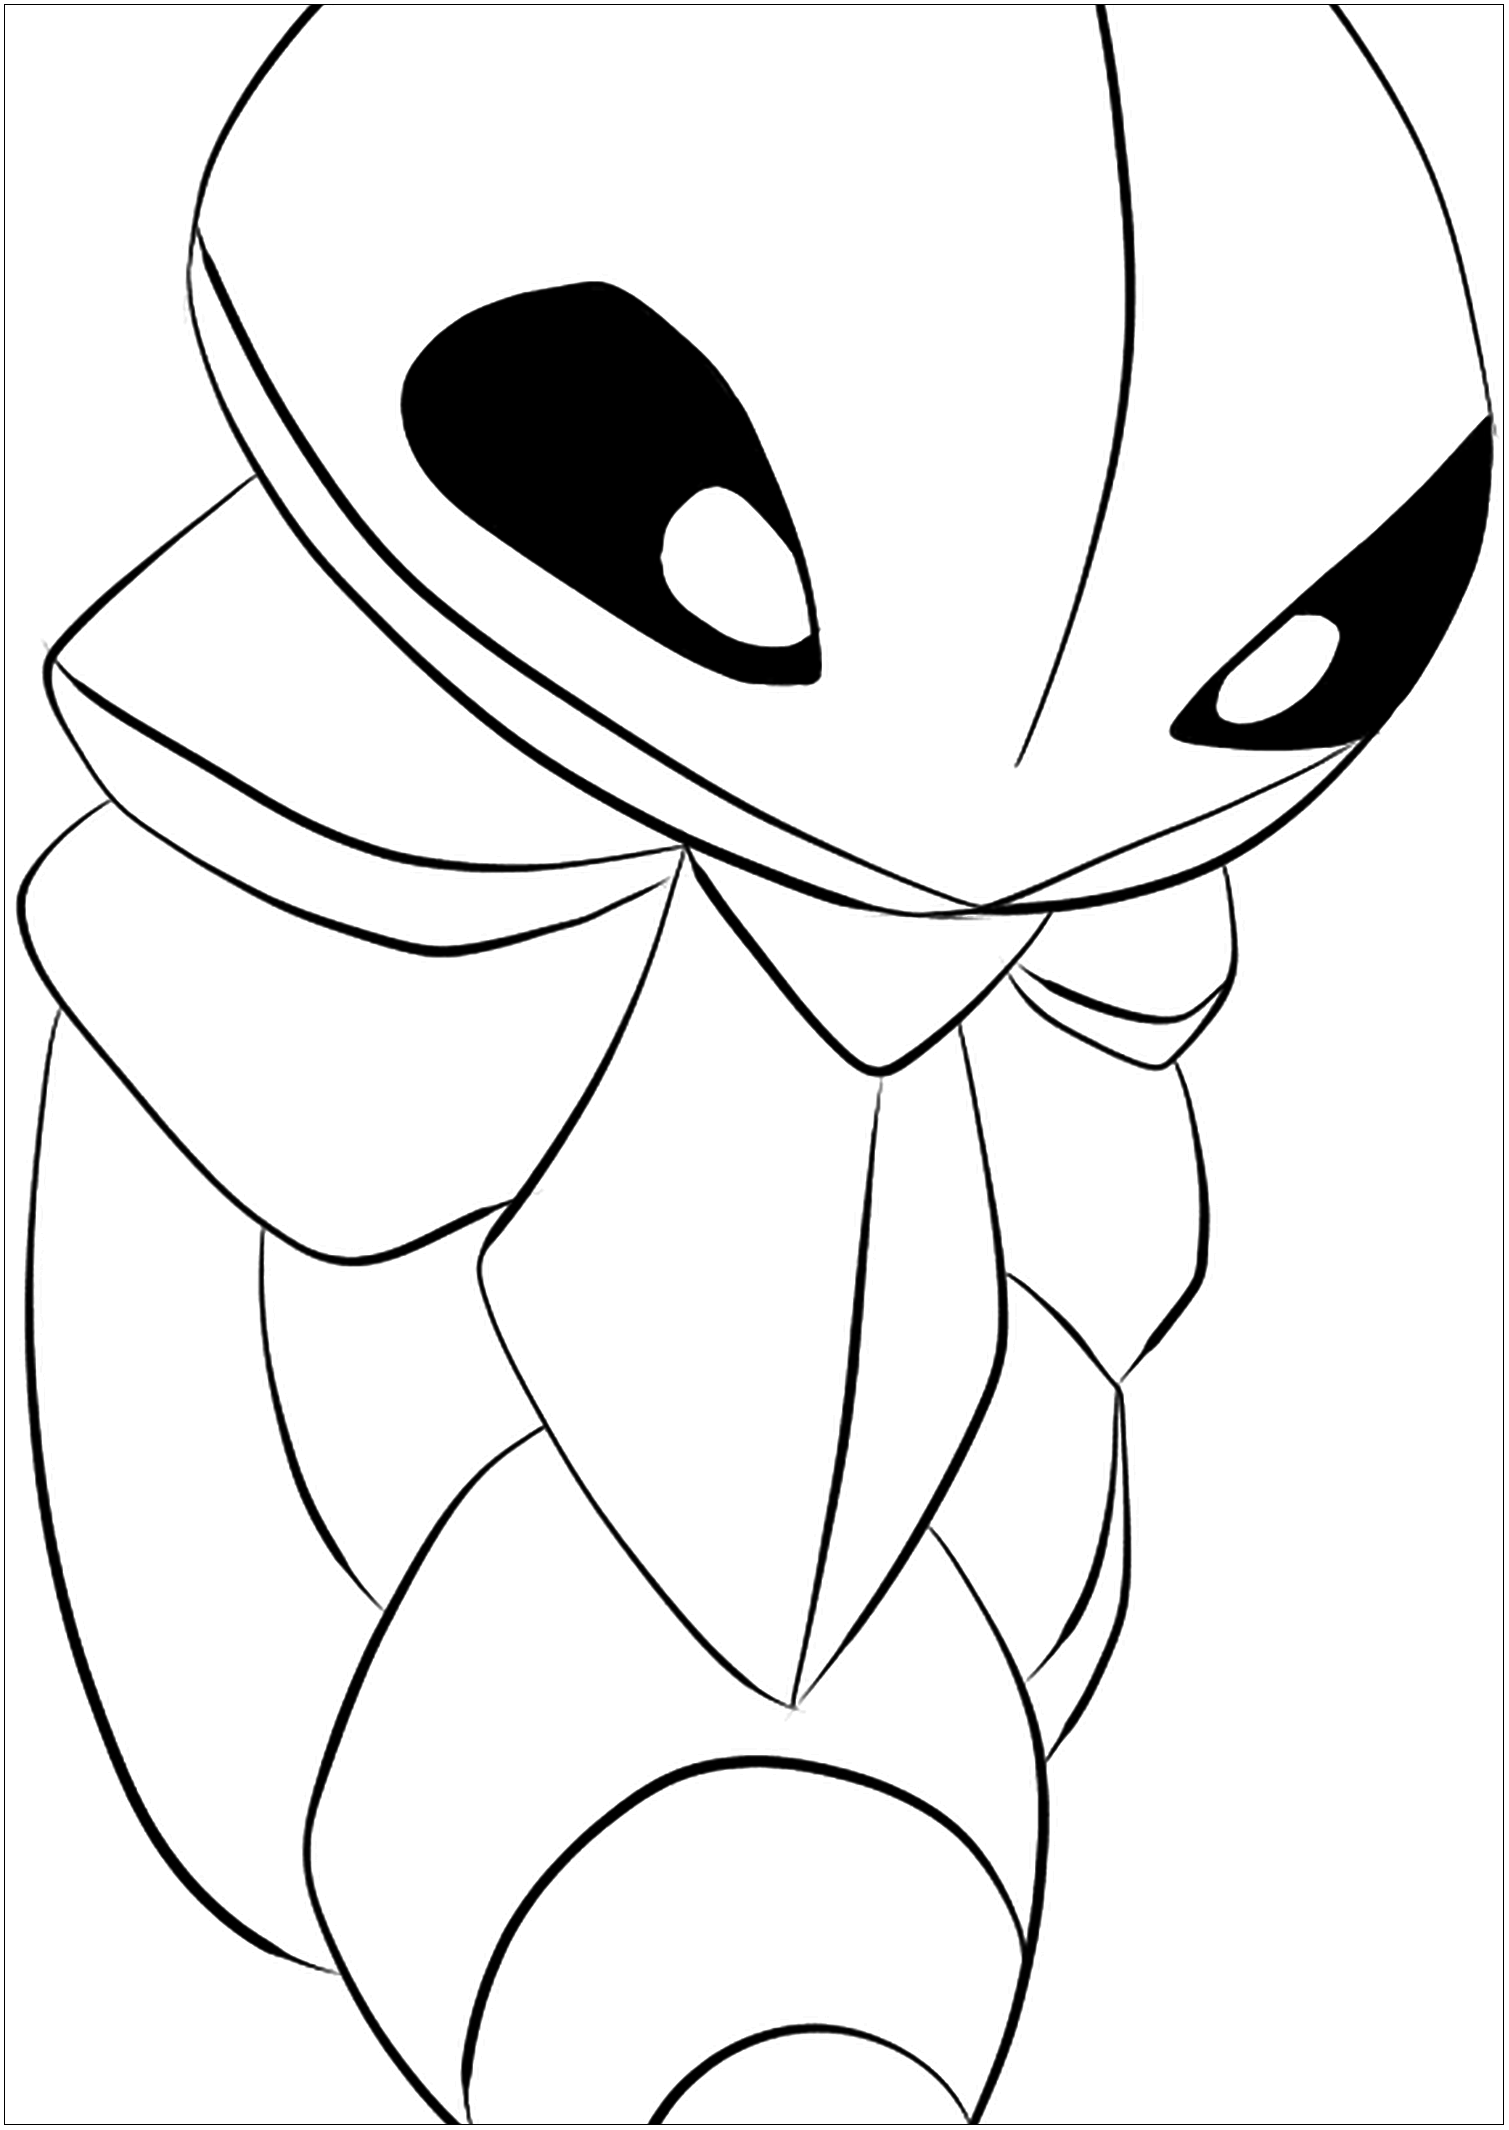 Kakuna (No.14). Kakuna Coloring page, Generation I Pokemon of type Bug and PoisonOriginal image credit: Pokemon linearts by Lilly Gerbil'font-size:smaller;color:gray'>Permission: All rights reserved © Pokemon company and Ken Sugimori.